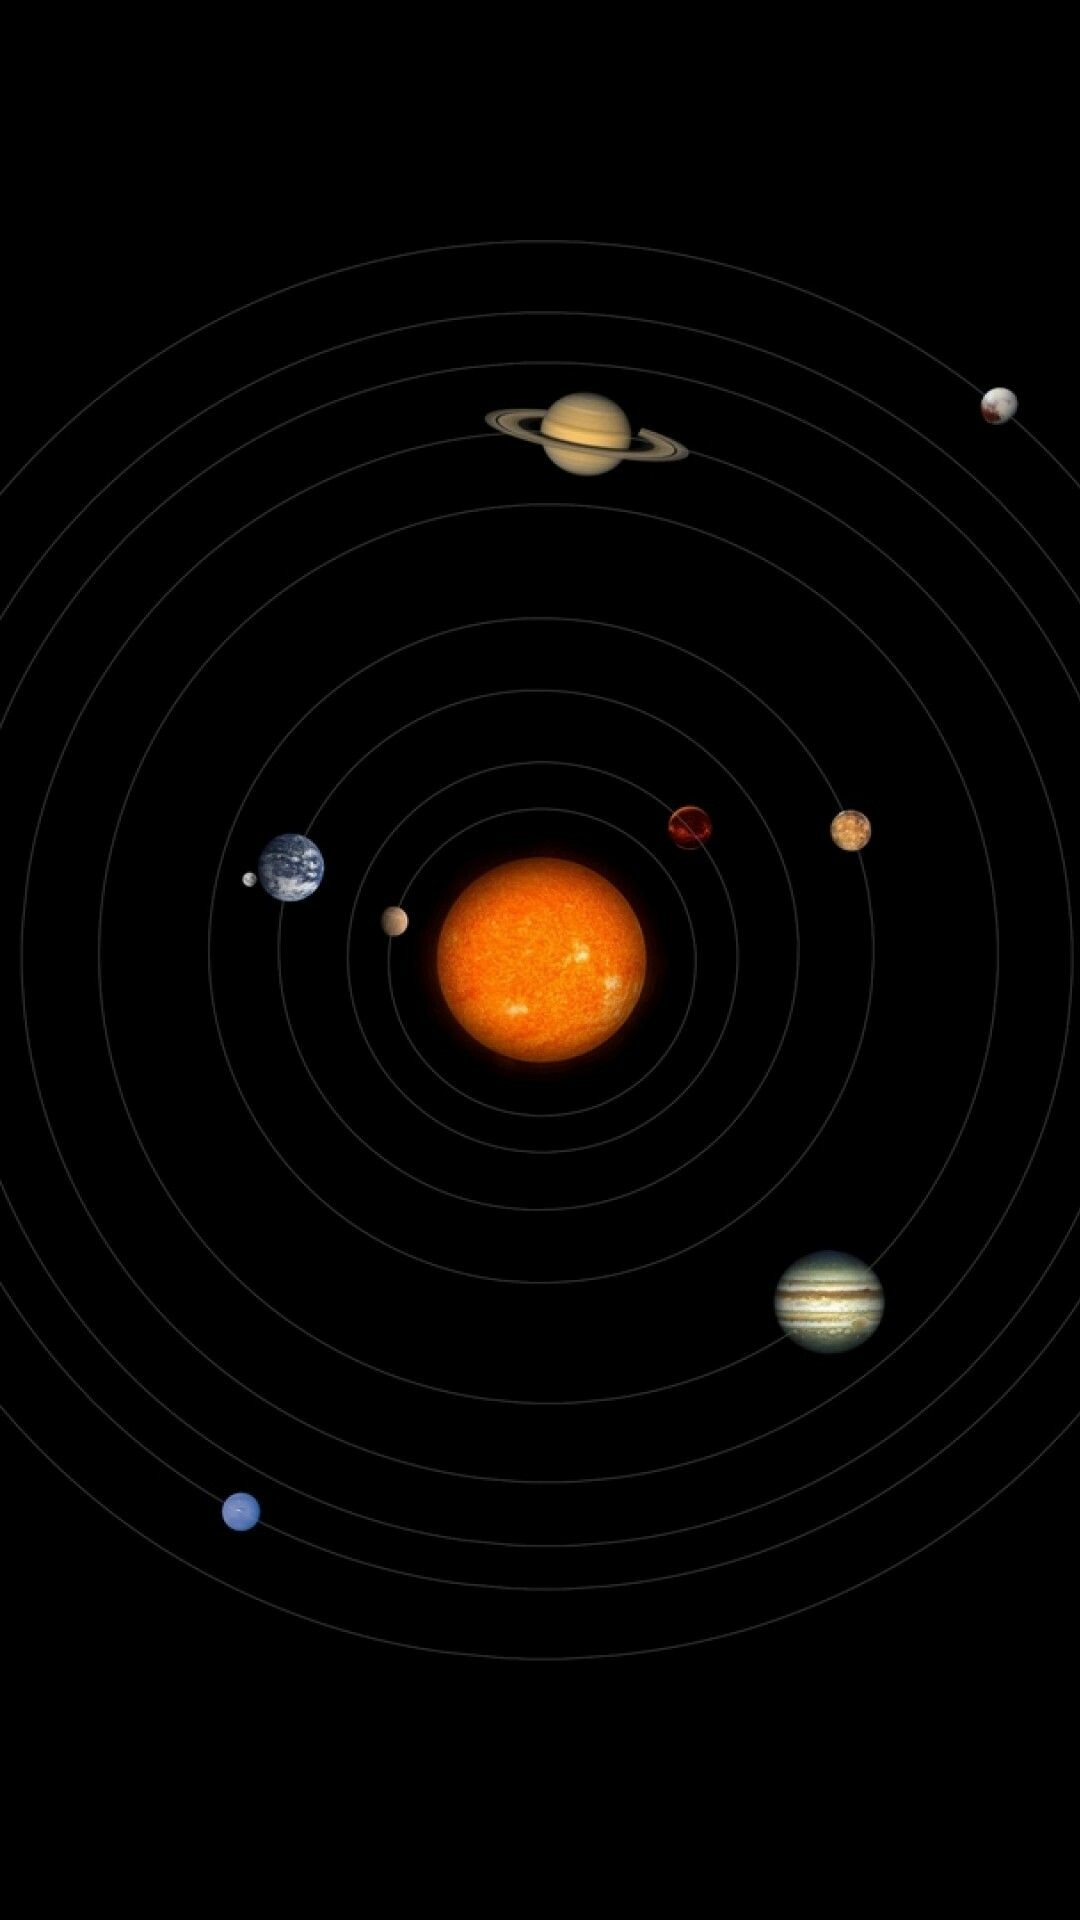 Solar System, 4k wallpapers, HD backgrounds, Celestial artistry, 1080x1920 Full HD Phone